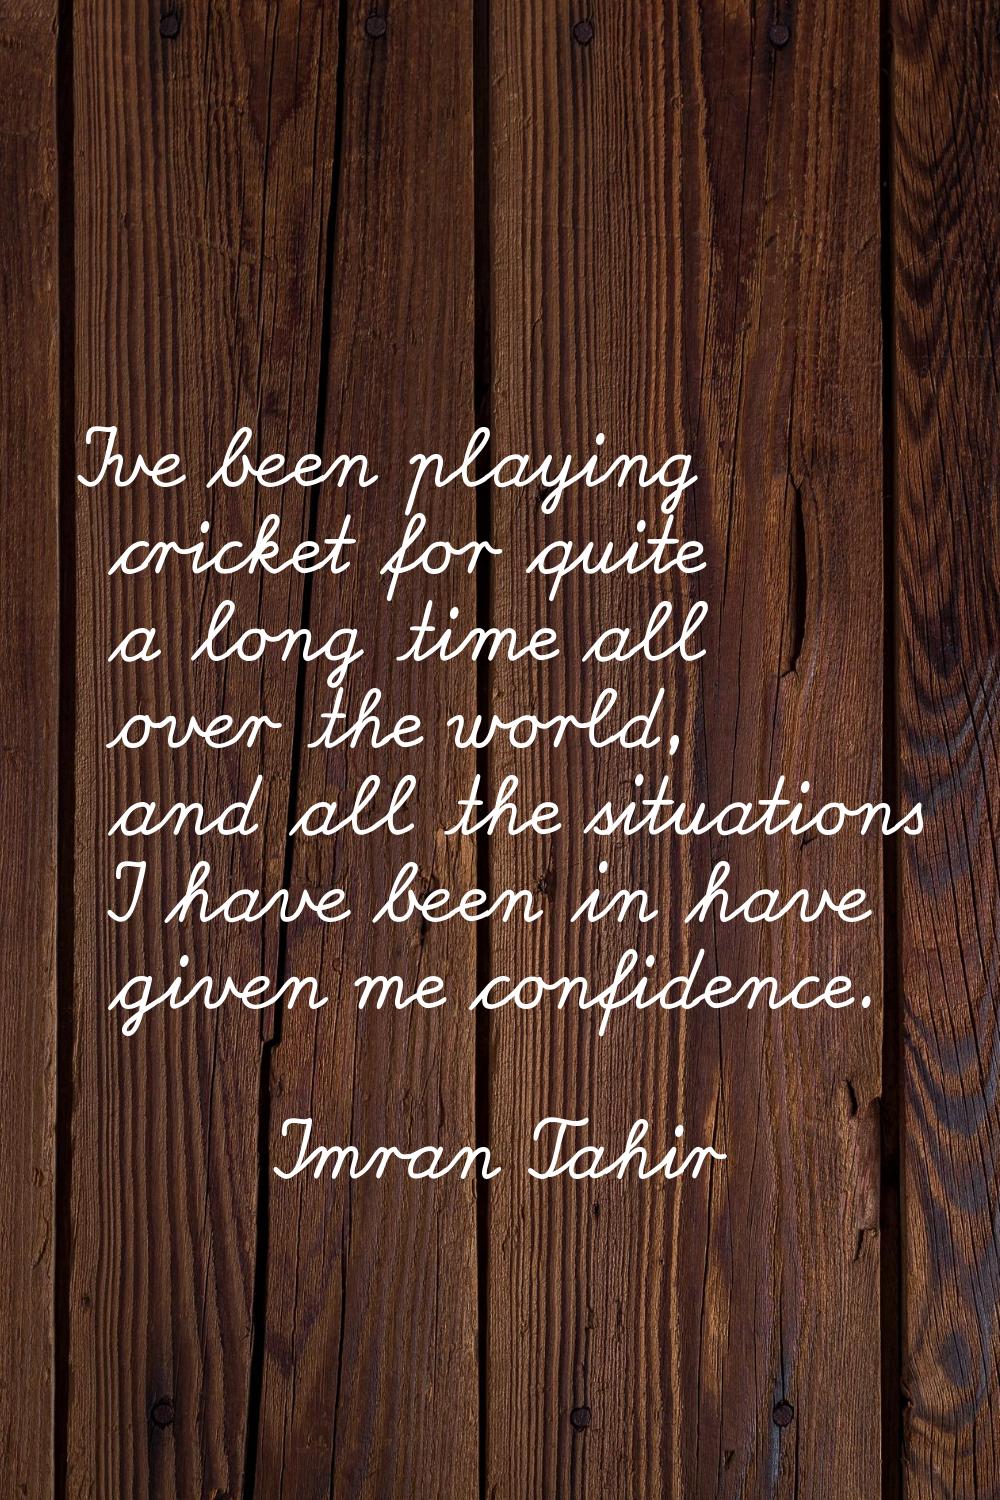 I've been playing cricket for quite a long time all over the world, and all the situations I have b